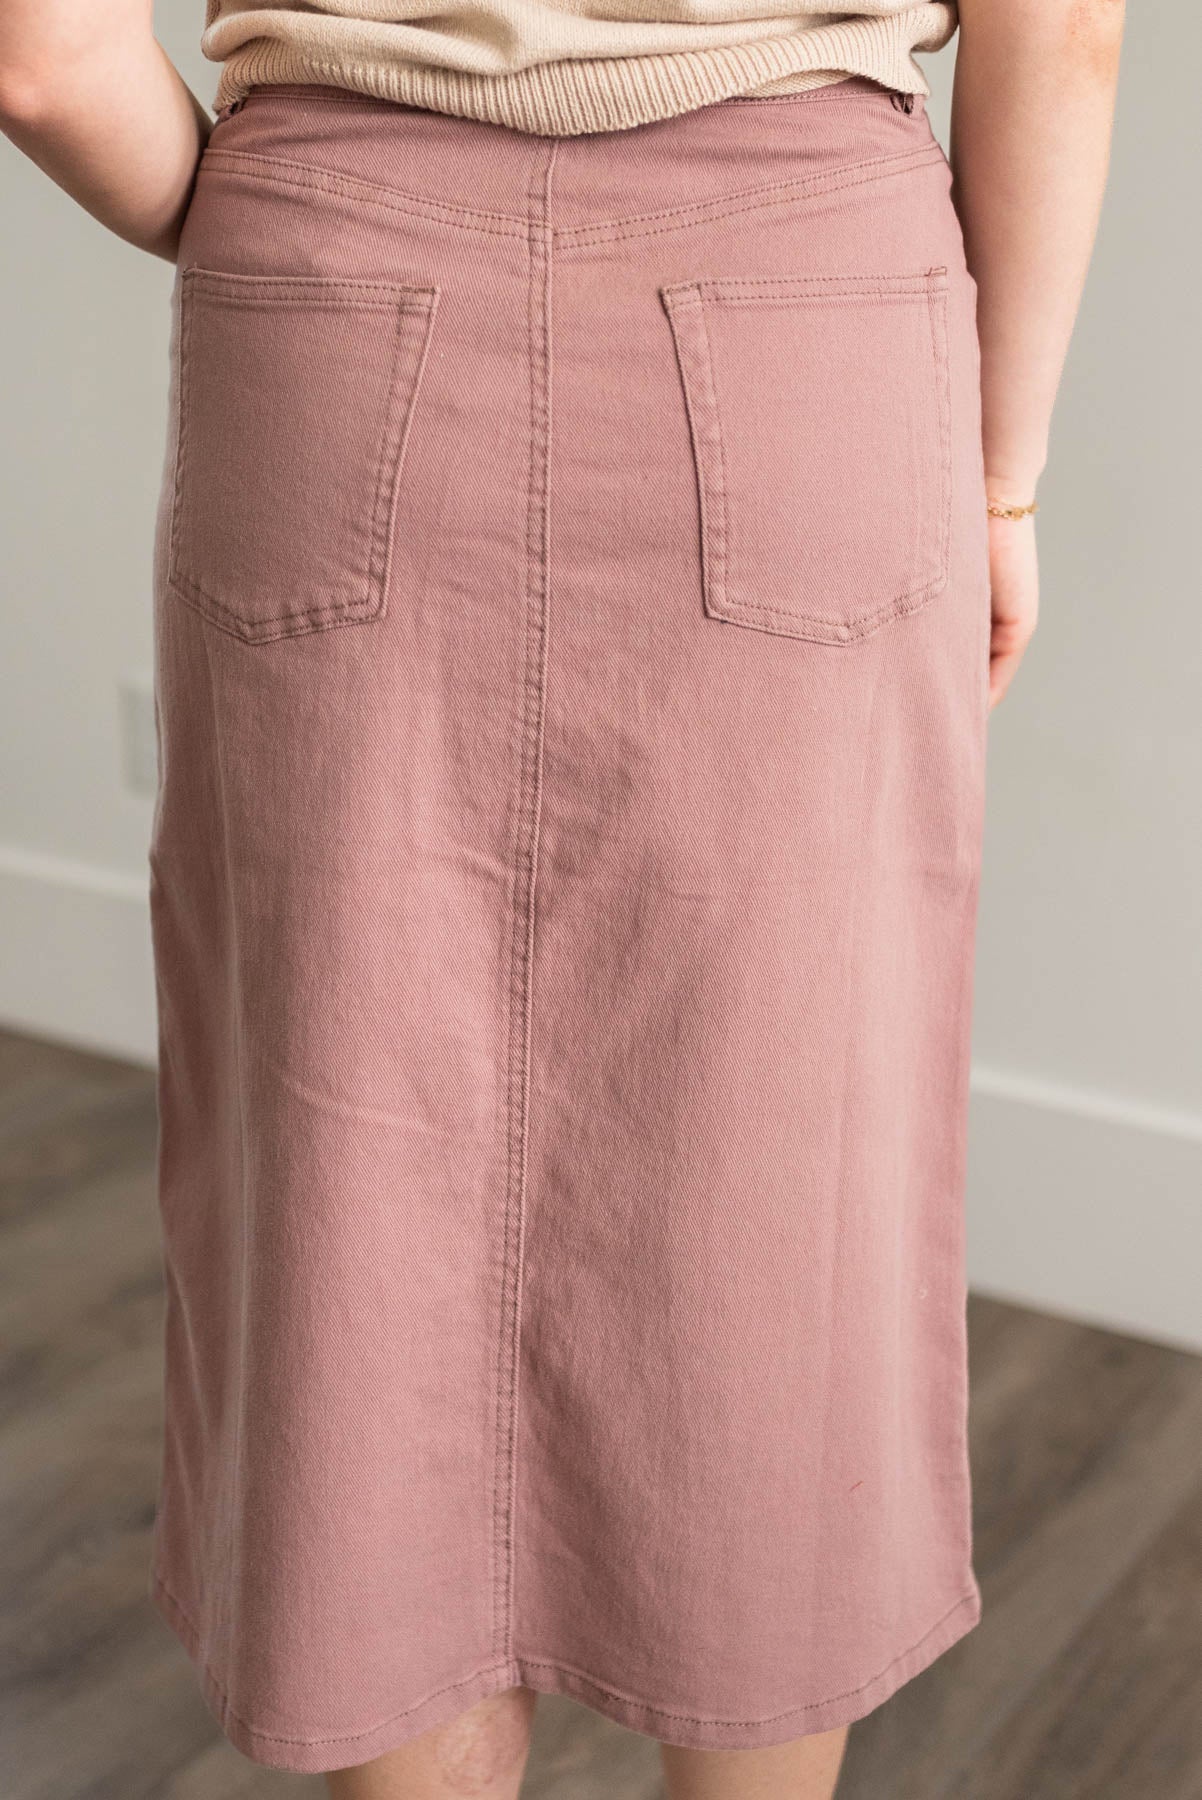 Back view of the mauve maxi skirt